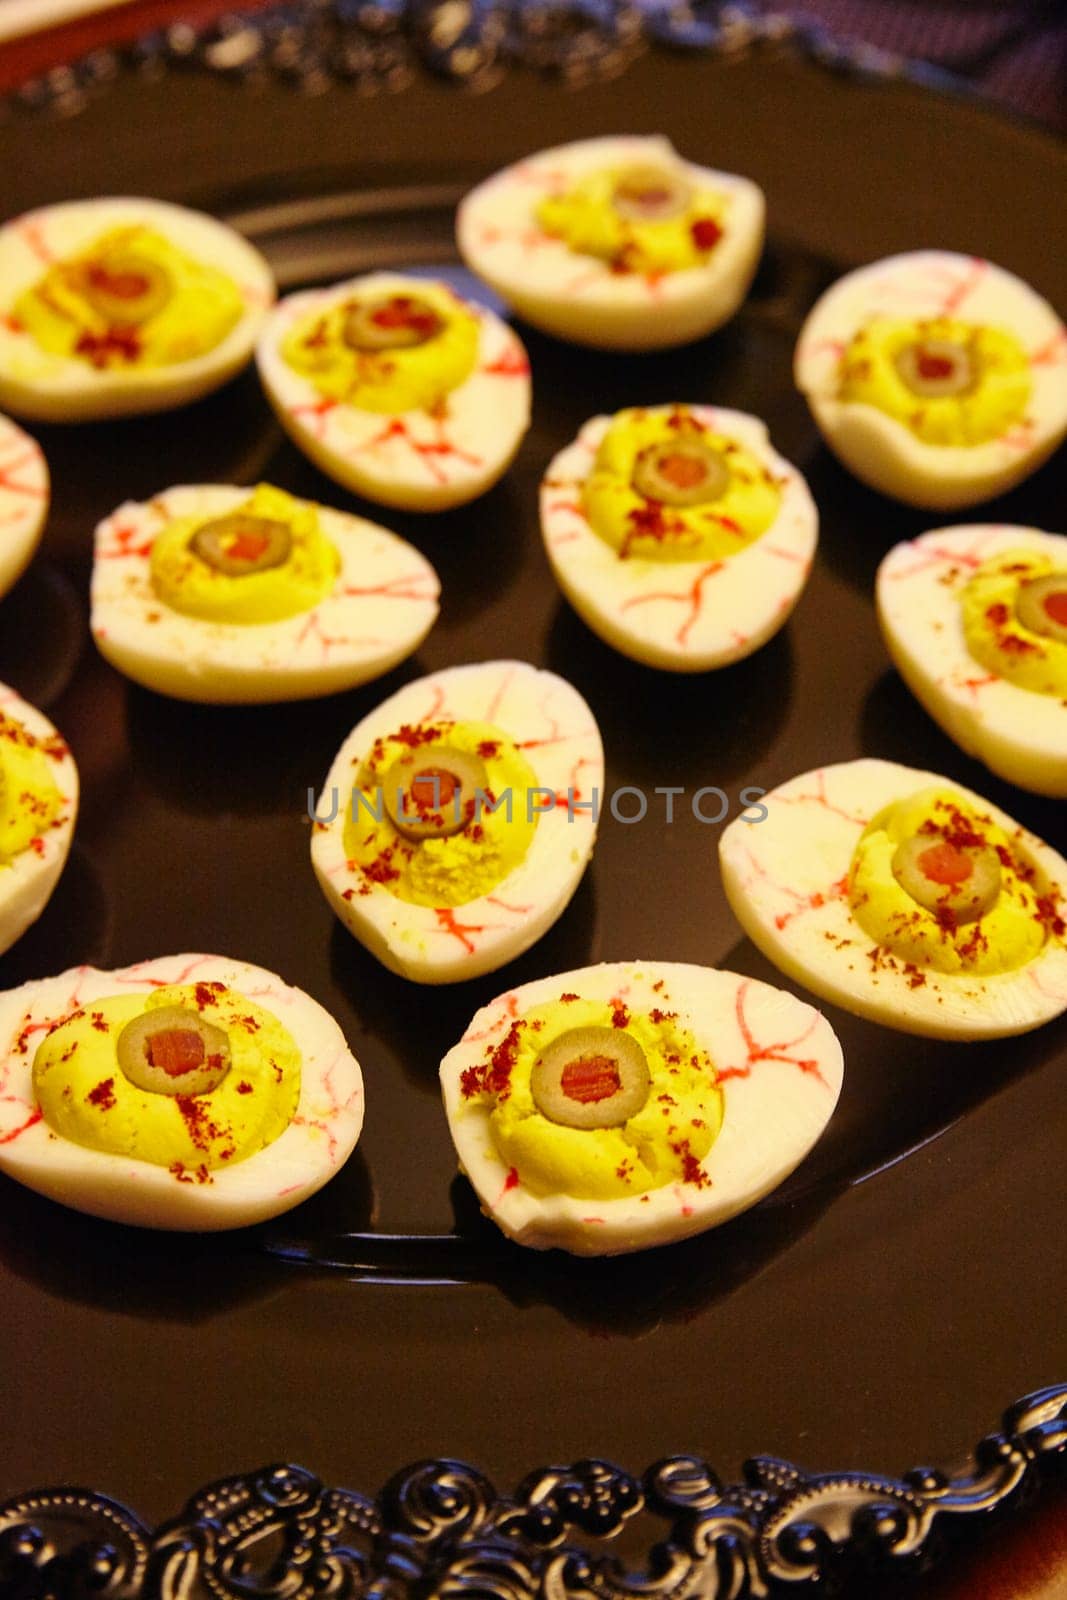 Creepy blood eye deviled eggs with a vibrant twist, elegantly presented on an ornate plate. Perfect for upscale dining, catering events, or festive celebrations.